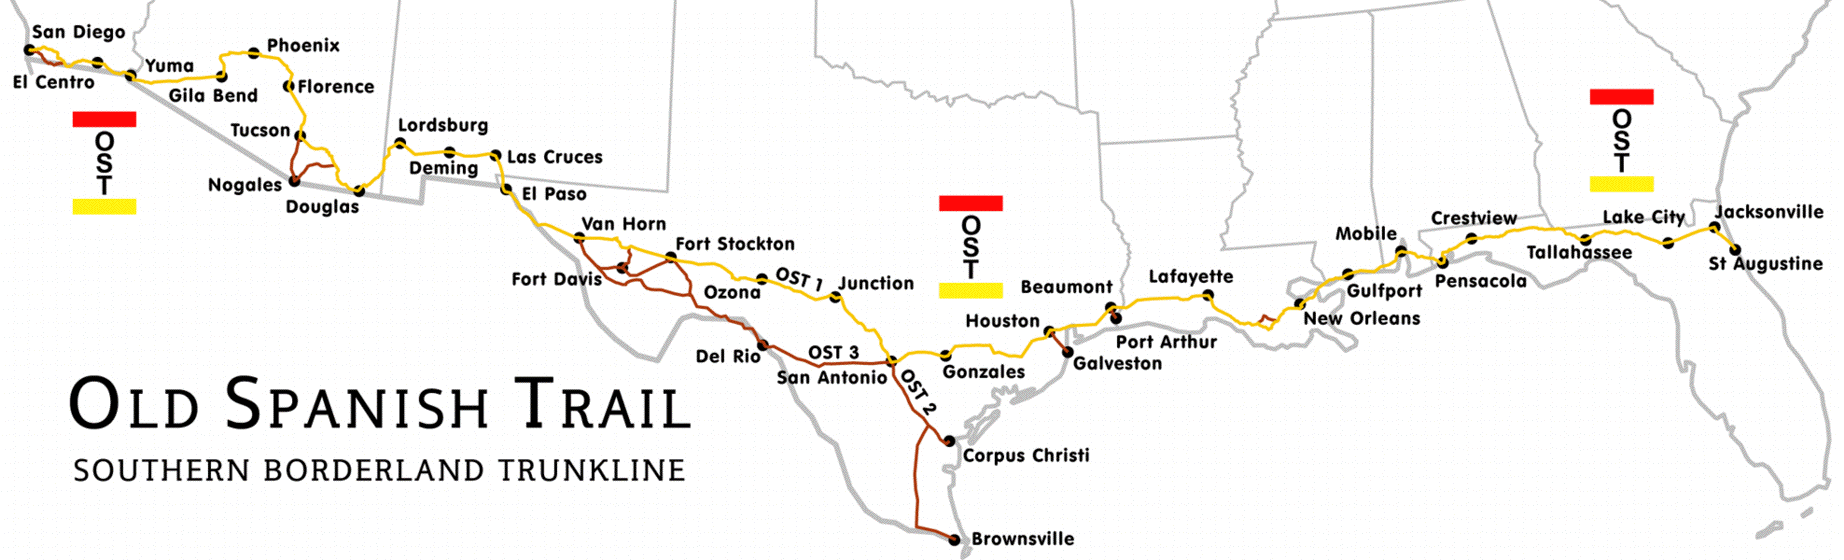 Old Spanish Trail Route Map